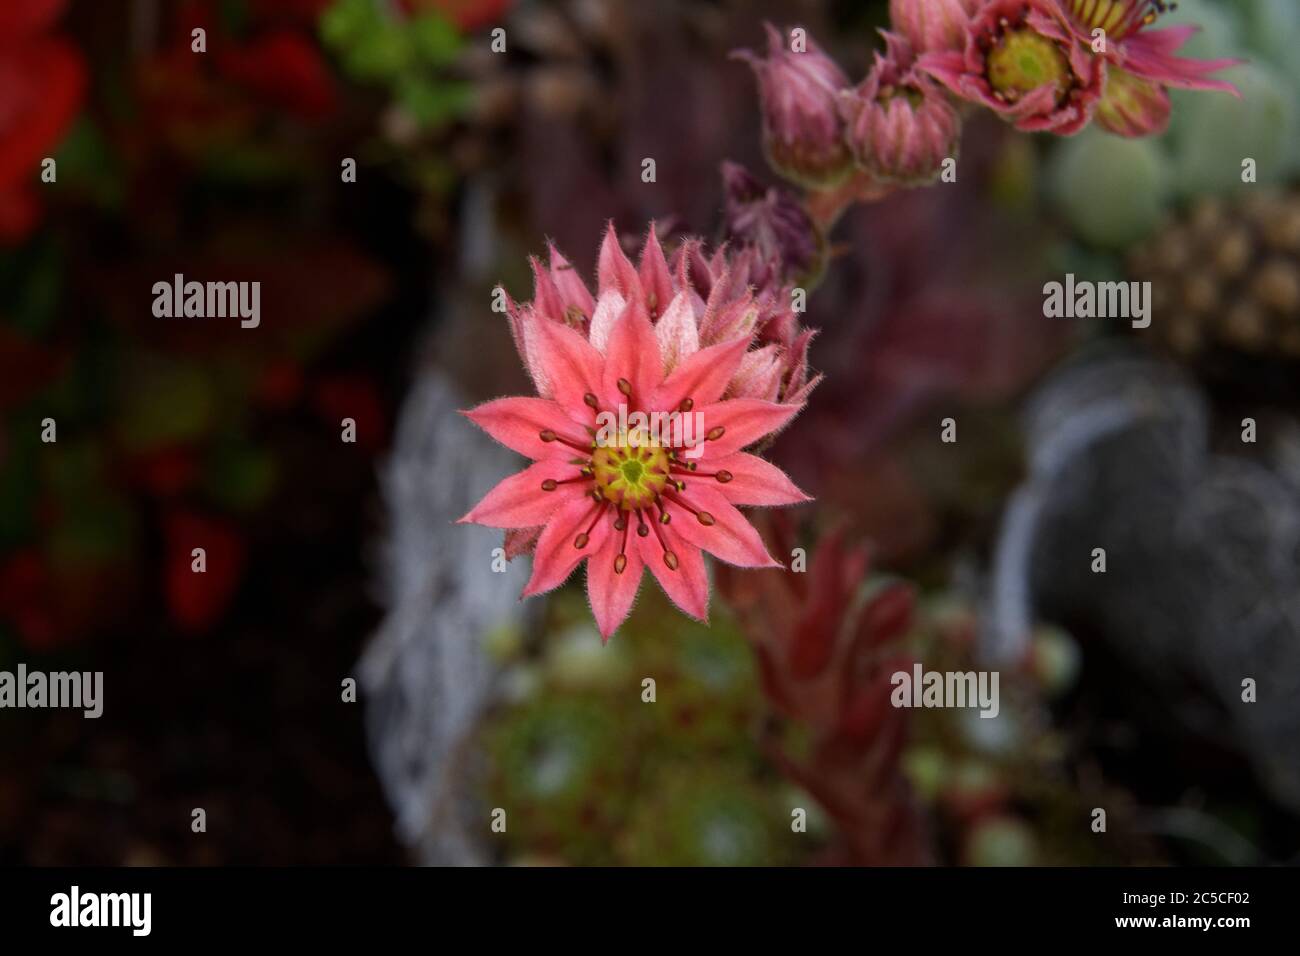 Sempervivum, close-up of a houseleek in bloom against a blurred background Stock Photo